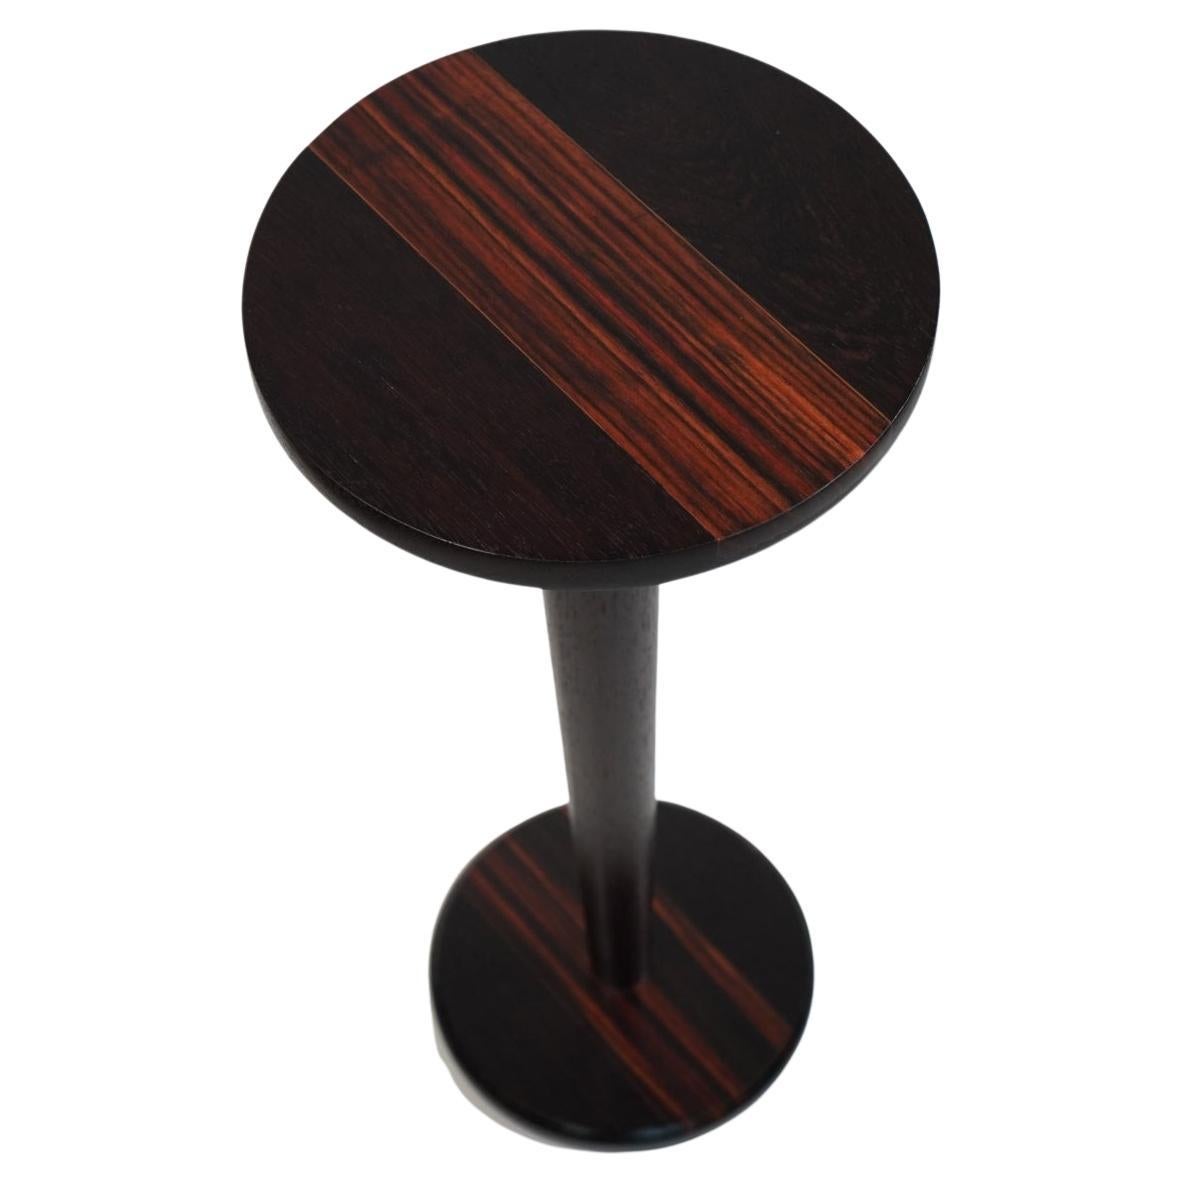 21st Century Mid-Century Modern Inspired Wenge and Macassar Ebony Cocktail Table For Sale